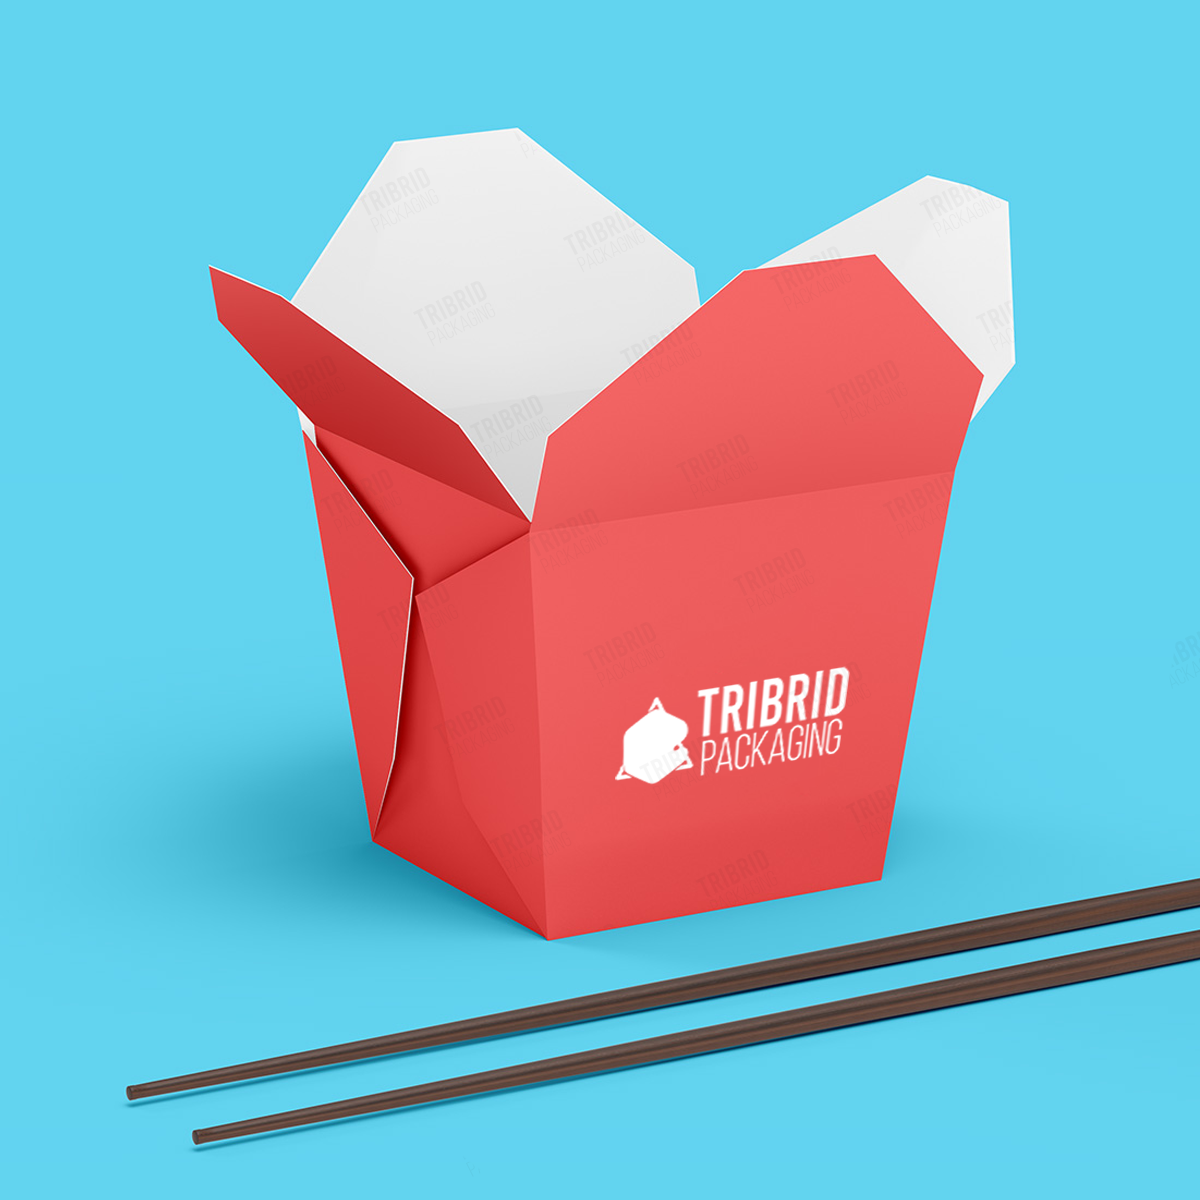 https://tribridpackaging.b-cdn.net/wp-content/uploads/2022/05/Chinese-Takeout-Food-Boxes_02.png